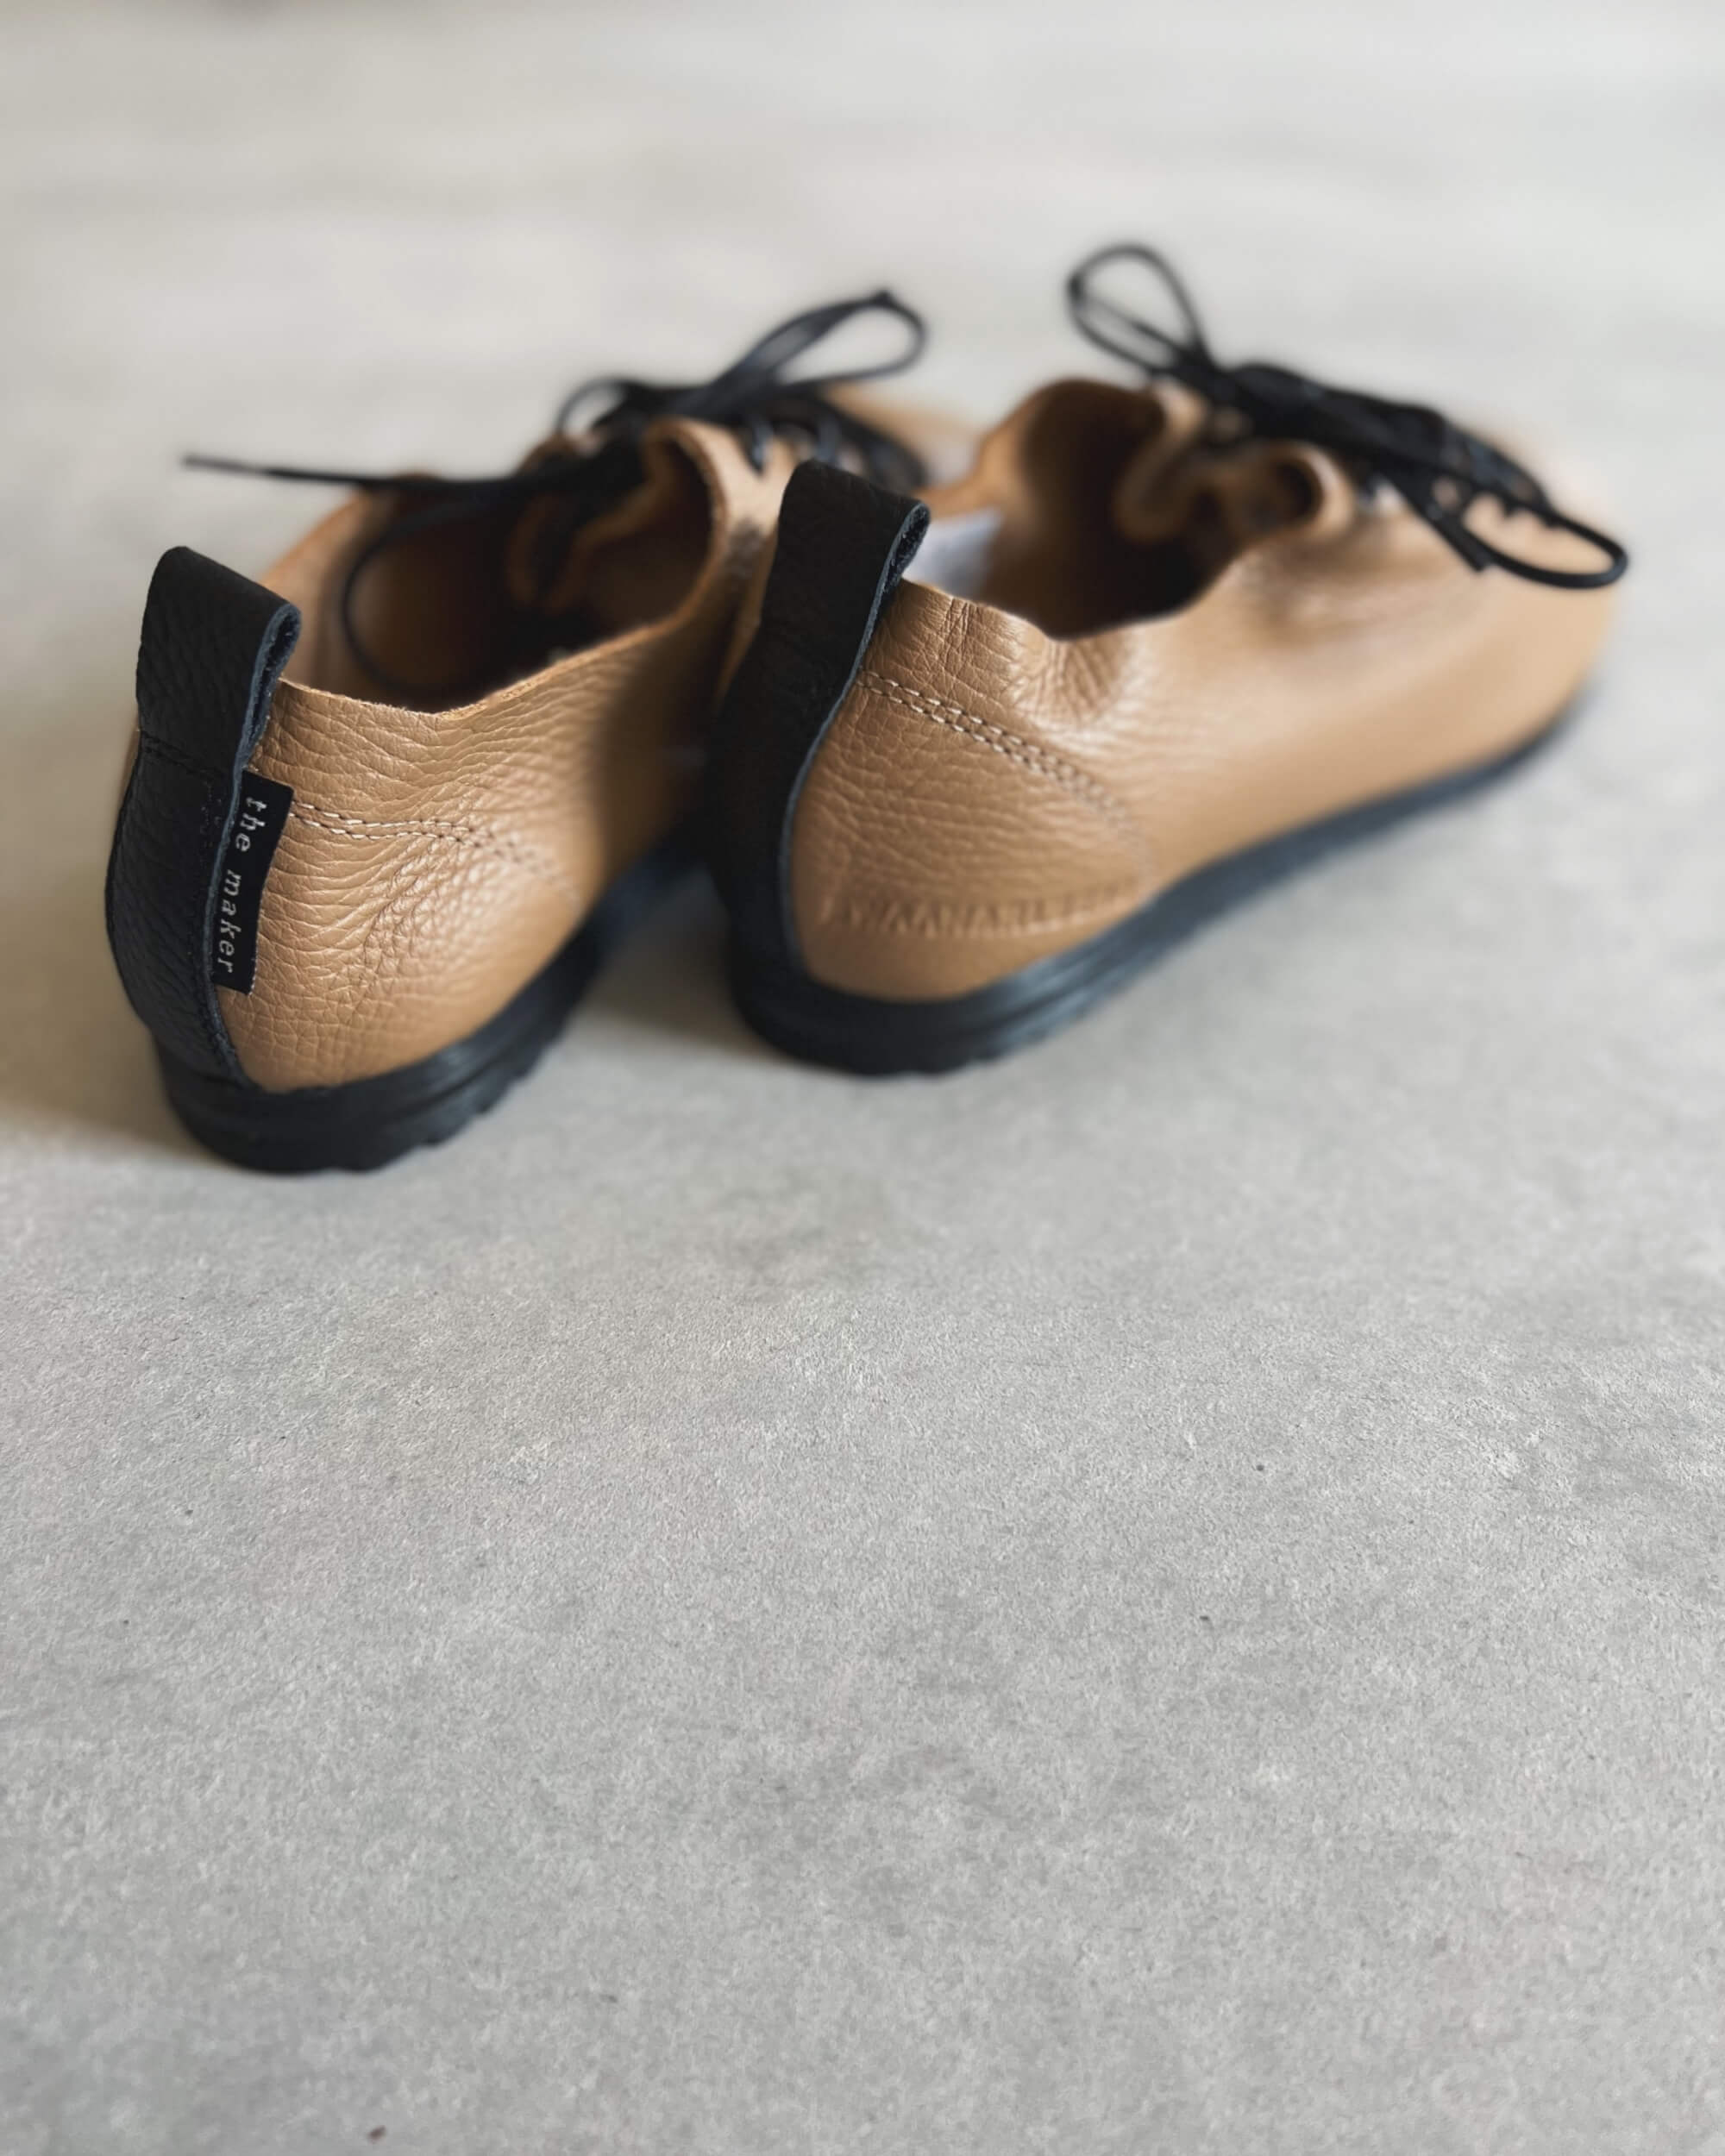 swaanarlberg : japanese leather shoes in cappuccino